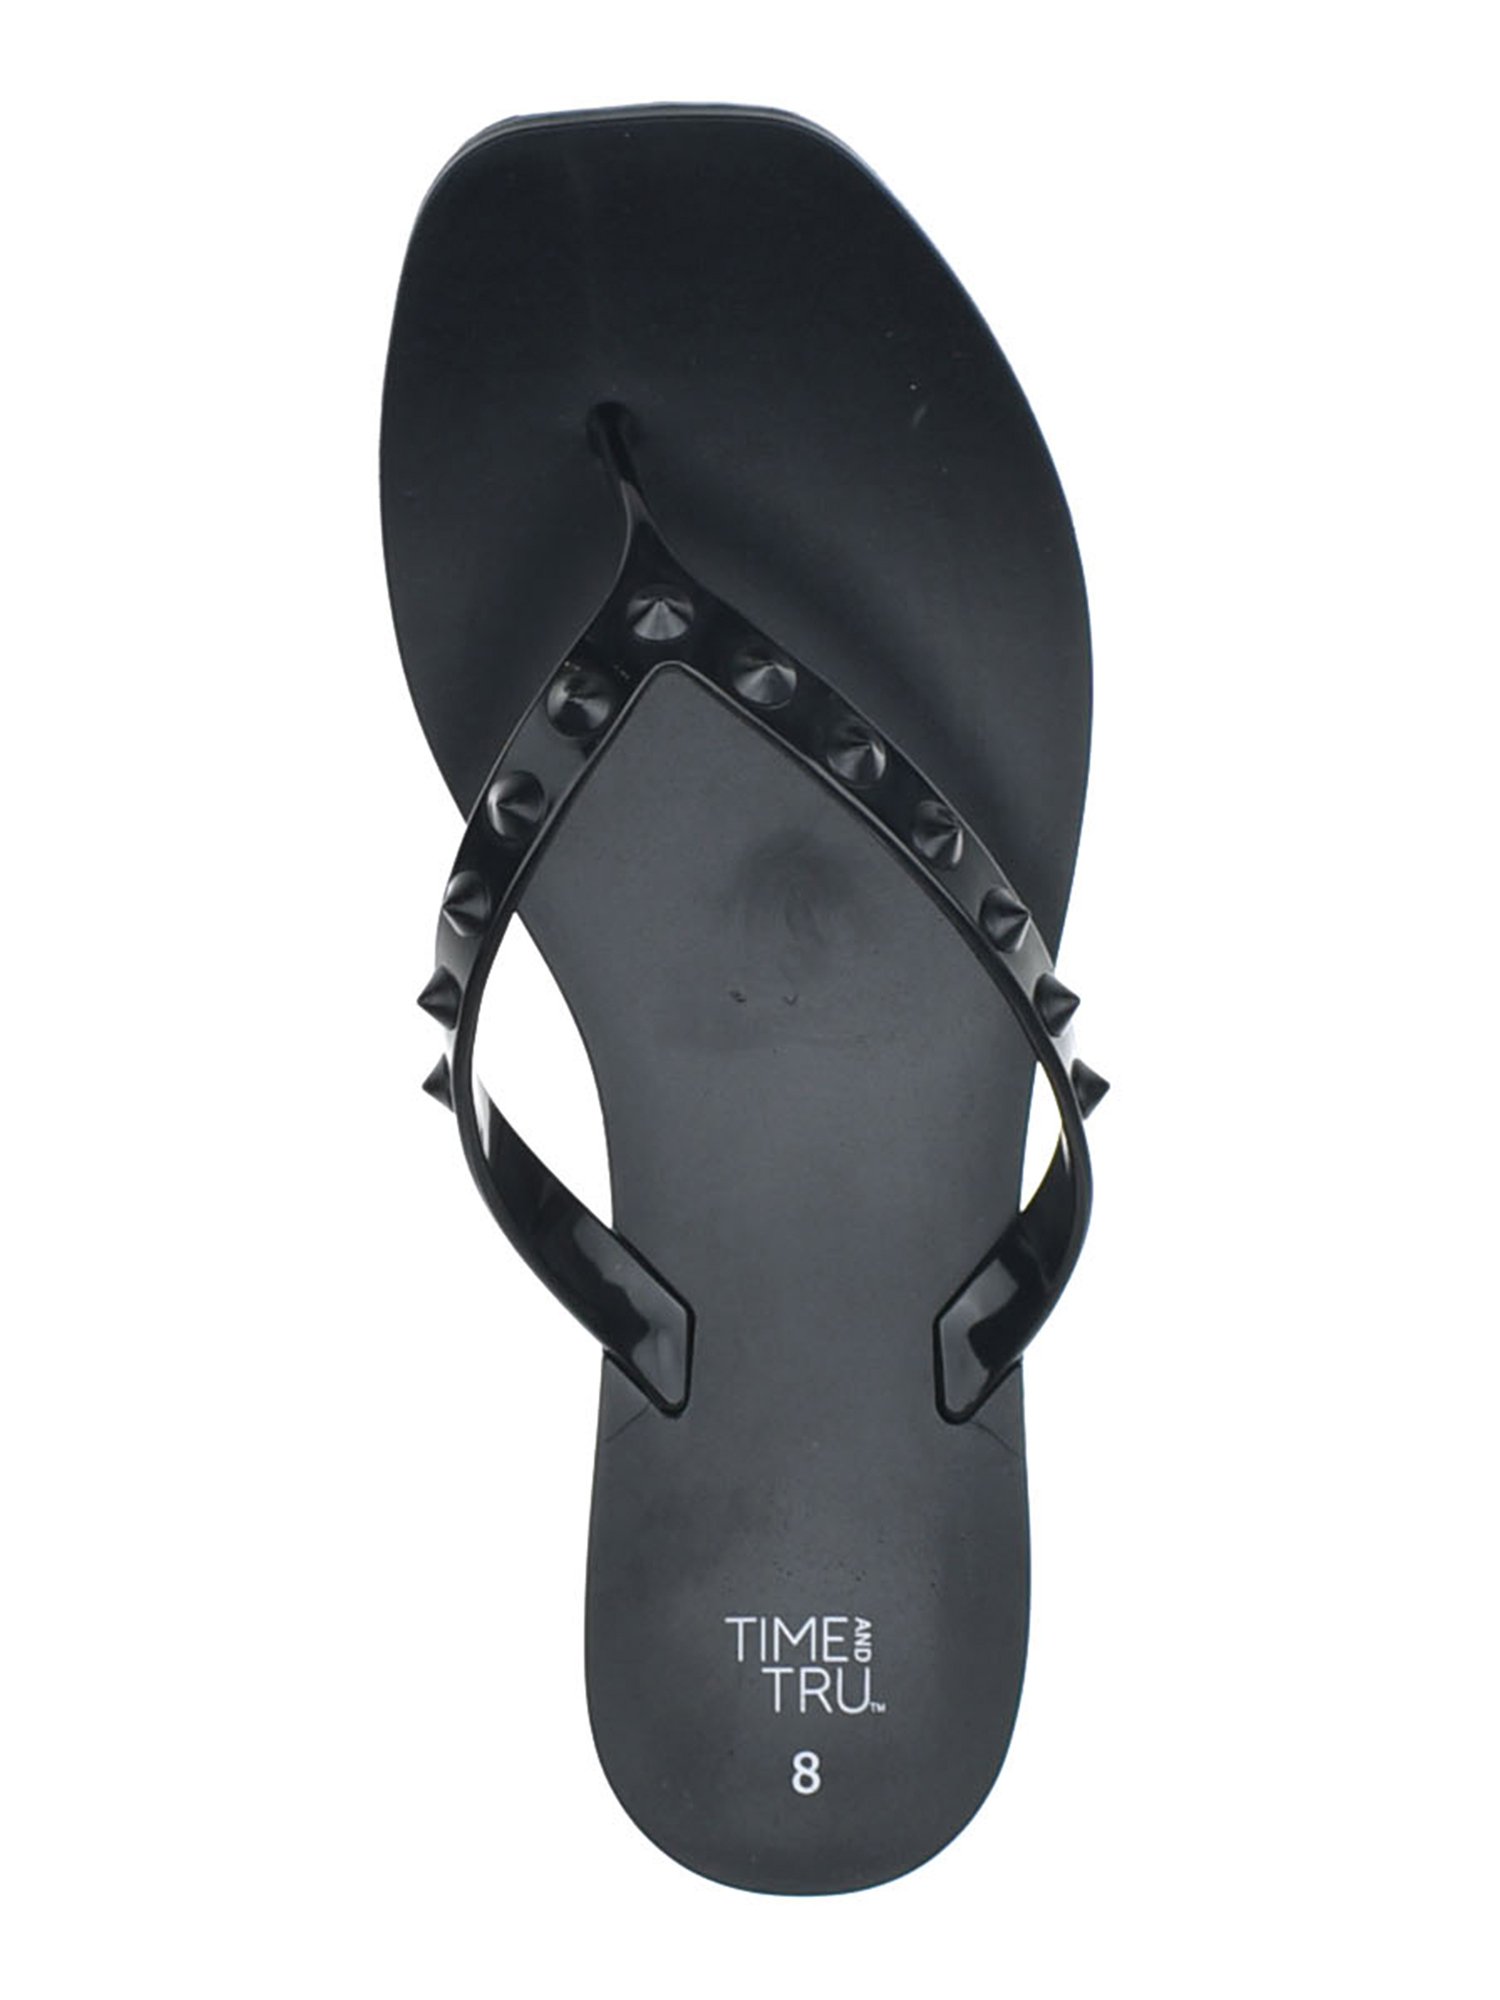 Time and Tru Women's Studded Jelly Flip Flop Sandals - image 5 of 7